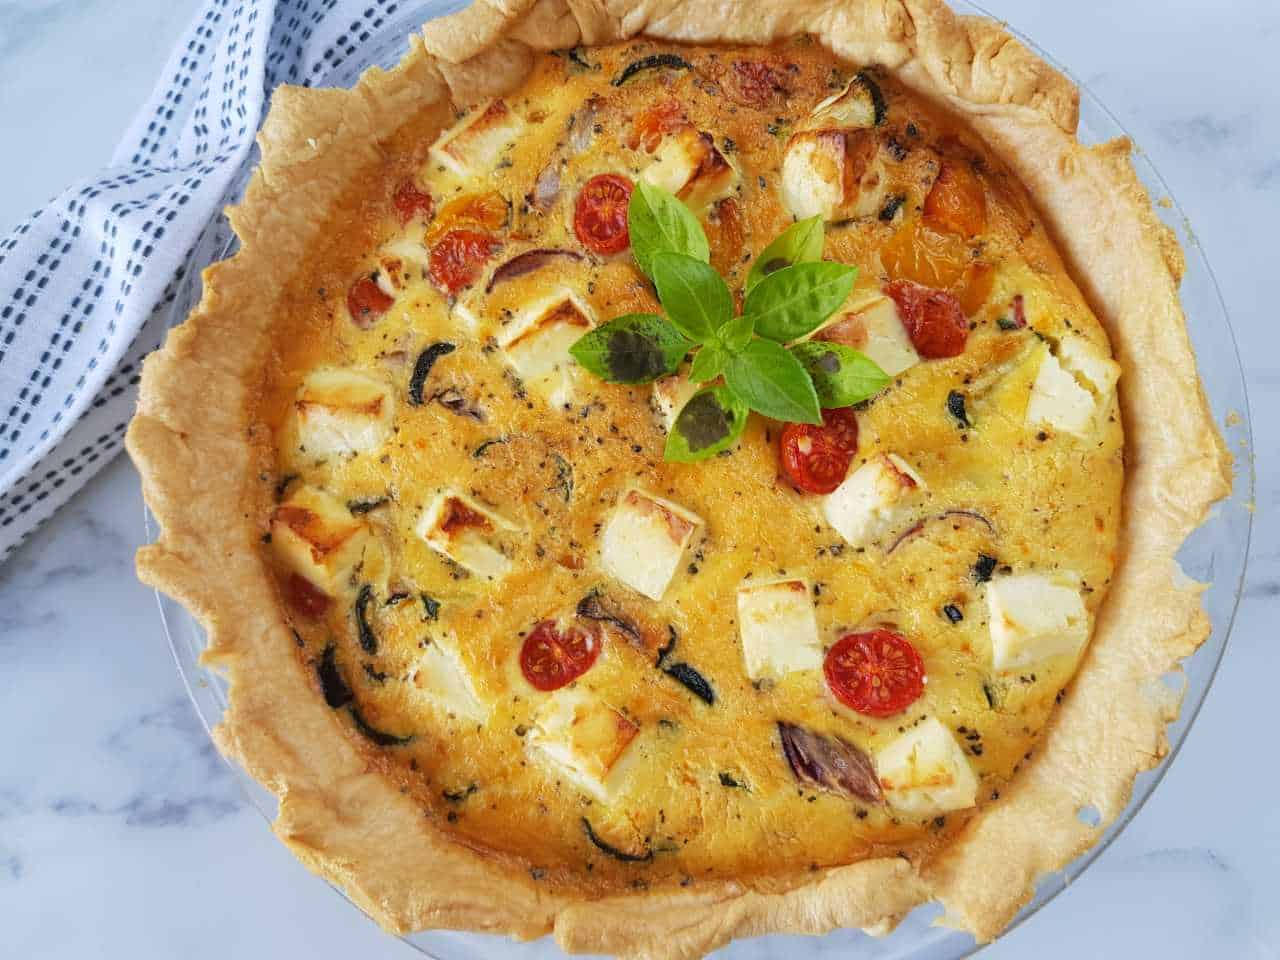 Quiche with feta and roasted vegetables on a marble table.